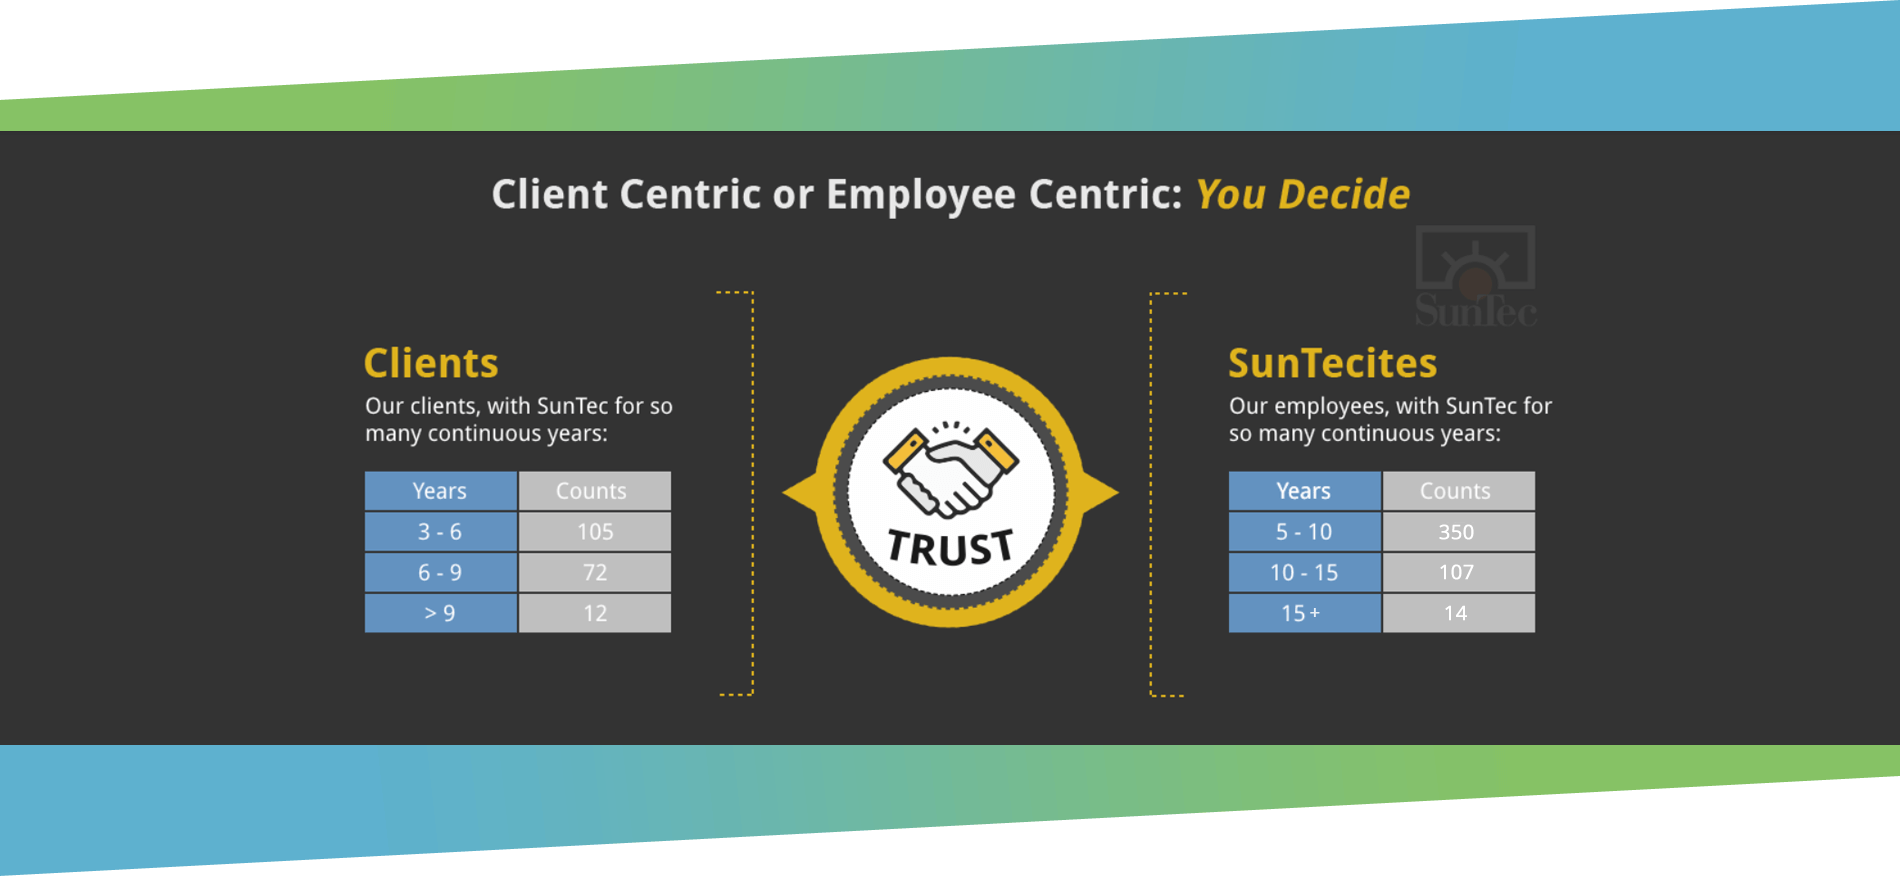 Client Centric or Employee Centric